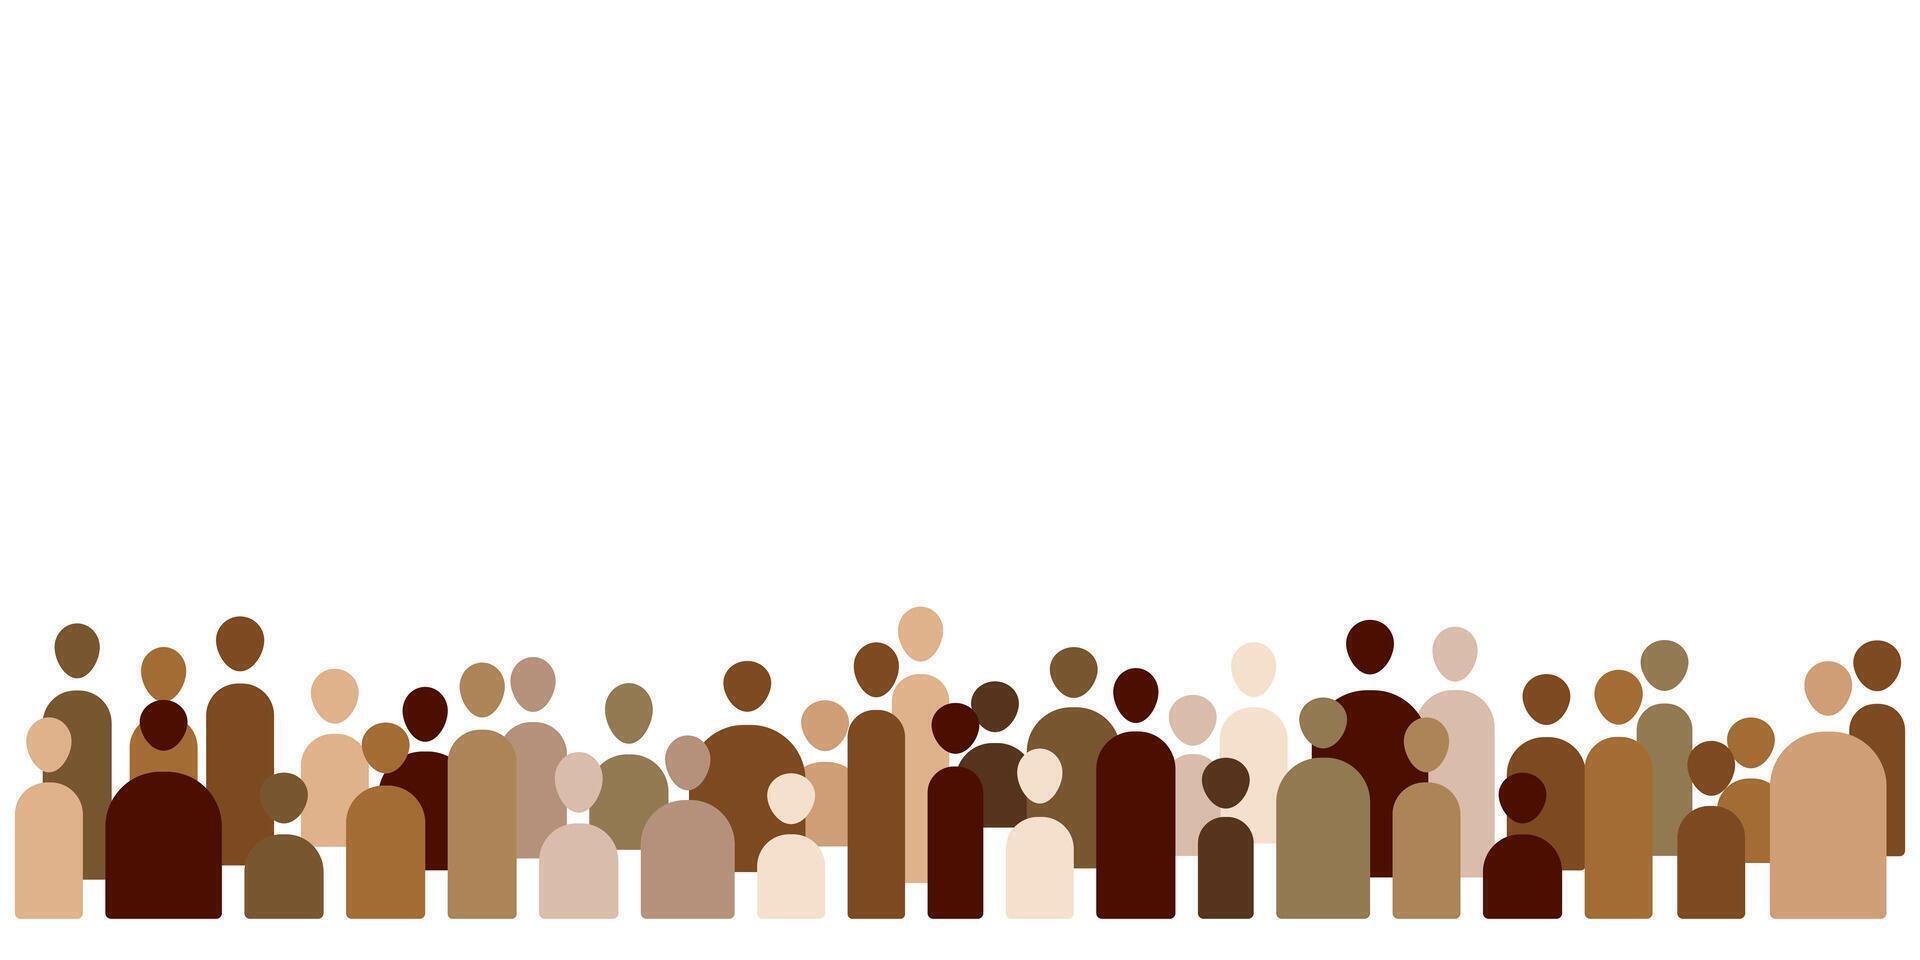 Diverse group of humans, abstract illustration, people figures banner design vector